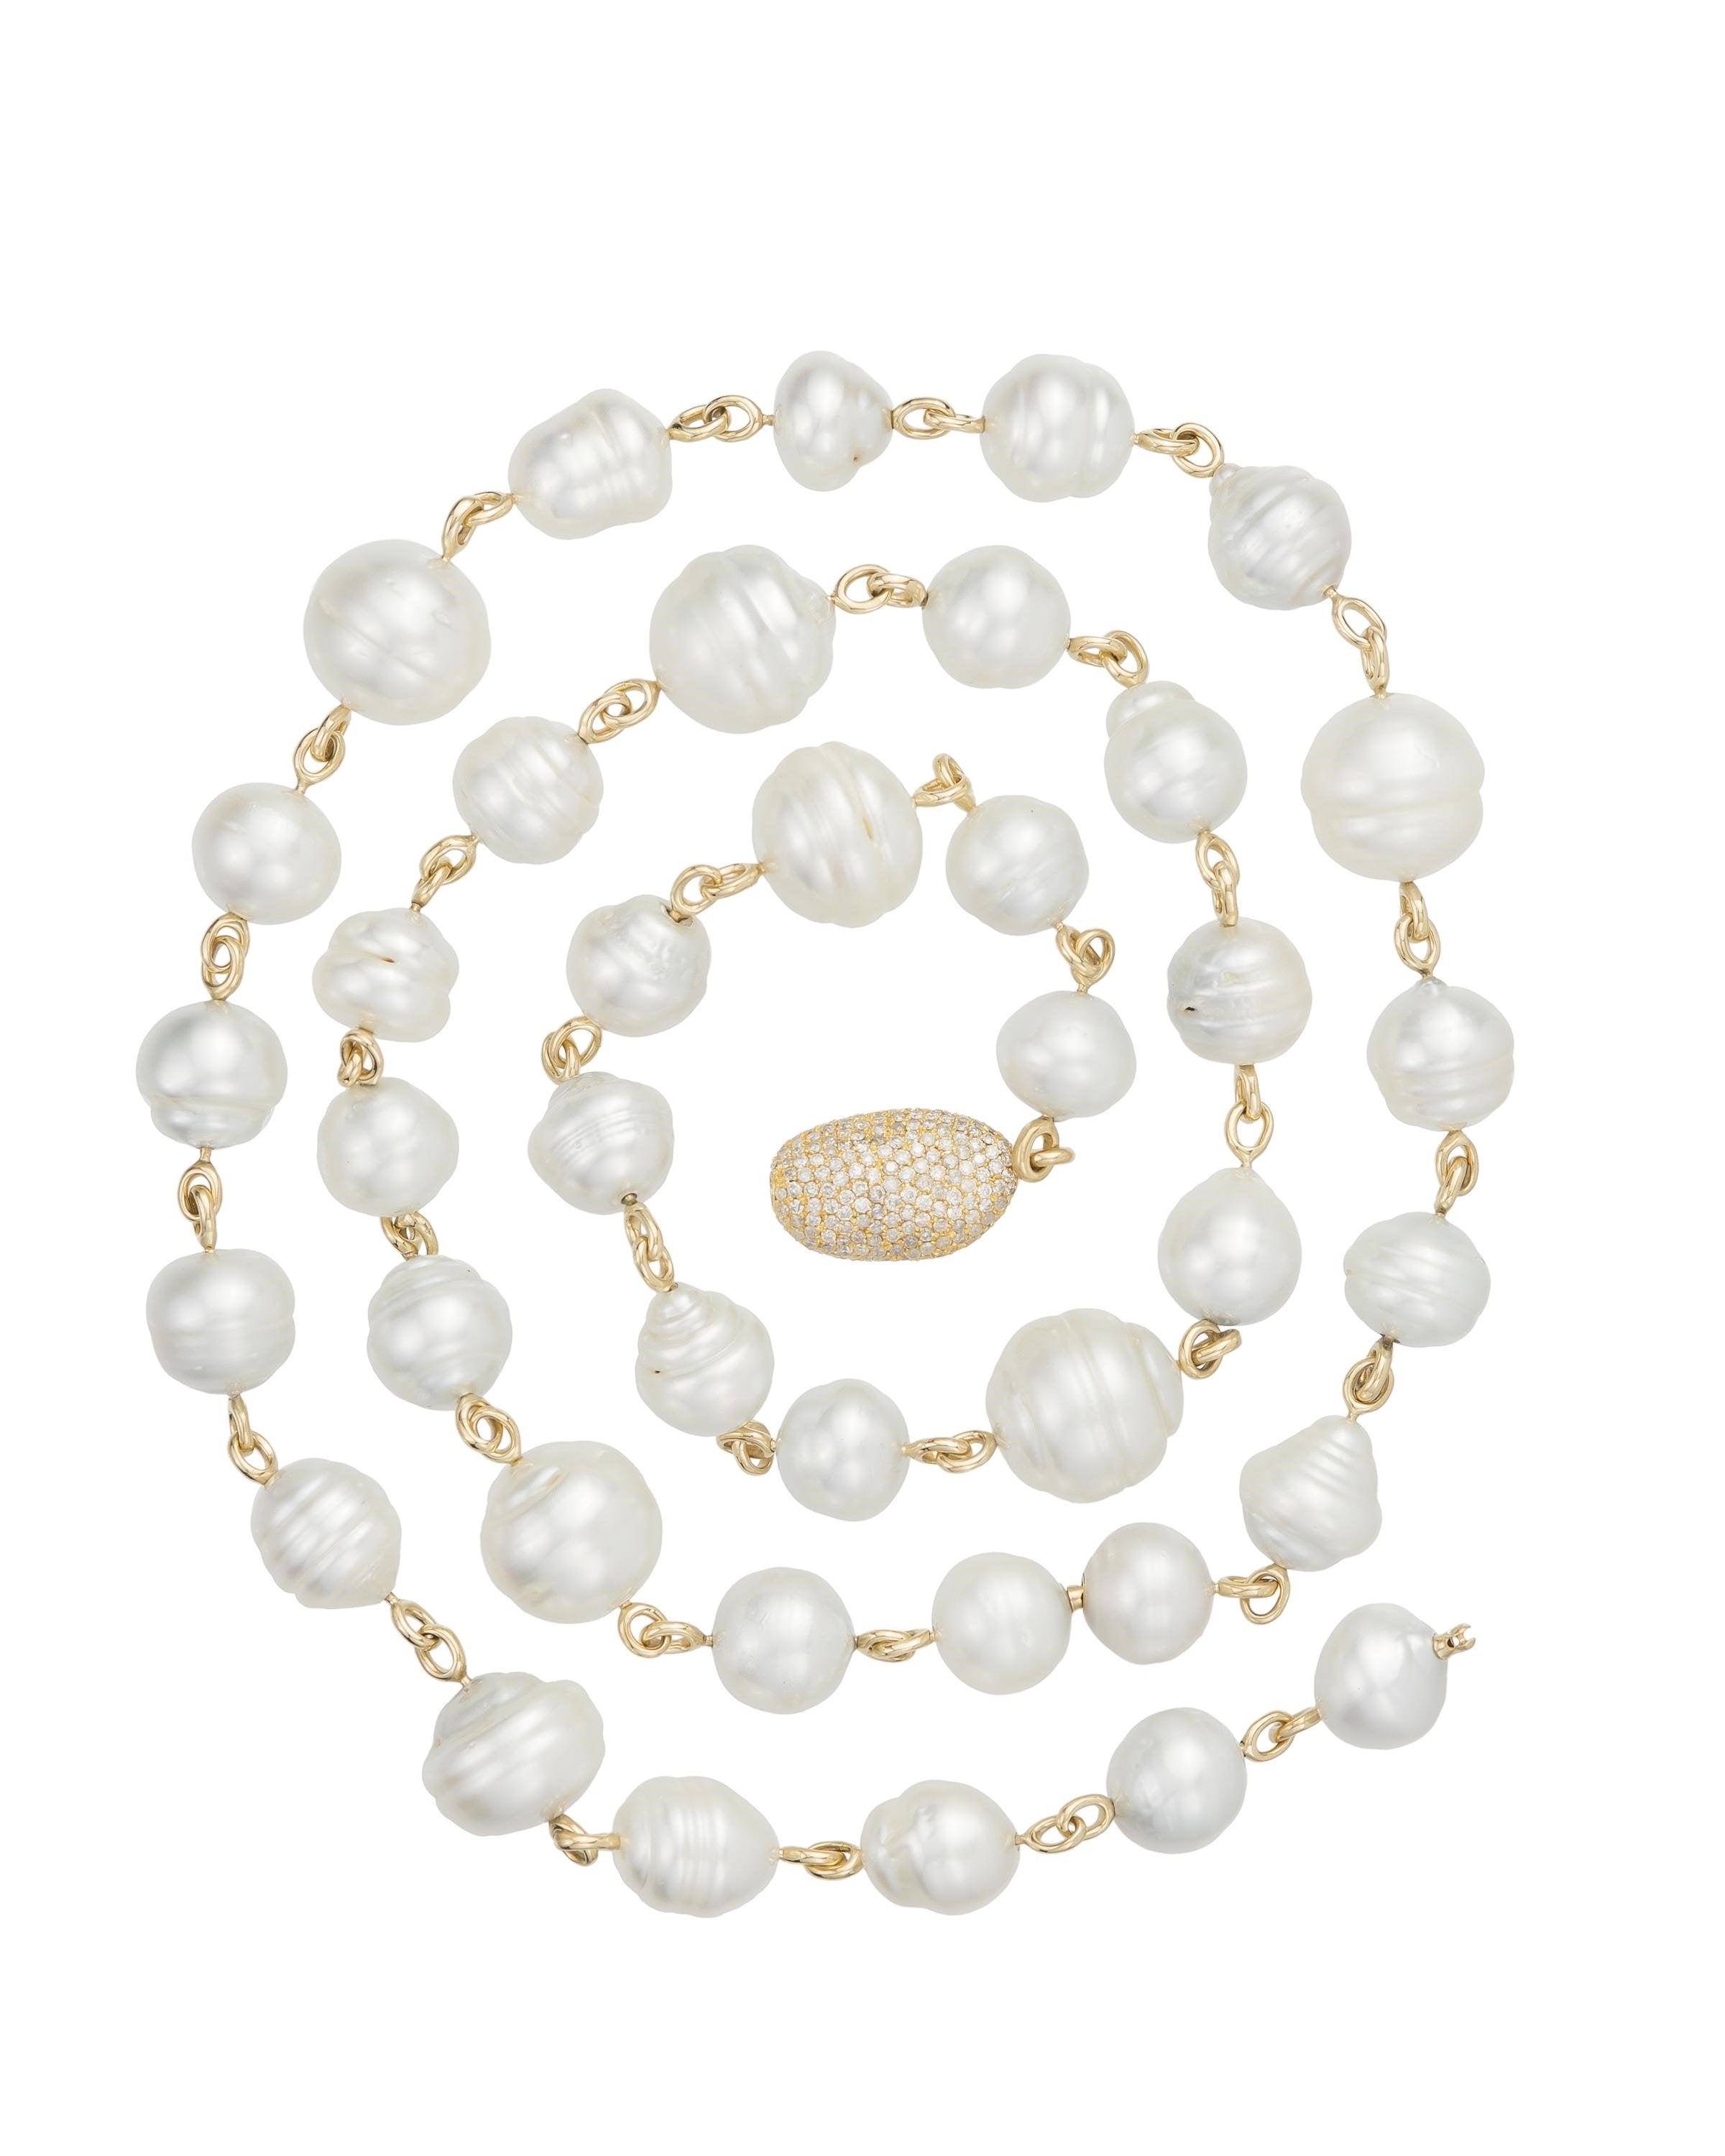 South Sea pearl necklace featuring grey white and golden tone Australian baroque pearls and pave diamond pebble set with diamonds, crafted 18 karat yellow gold.